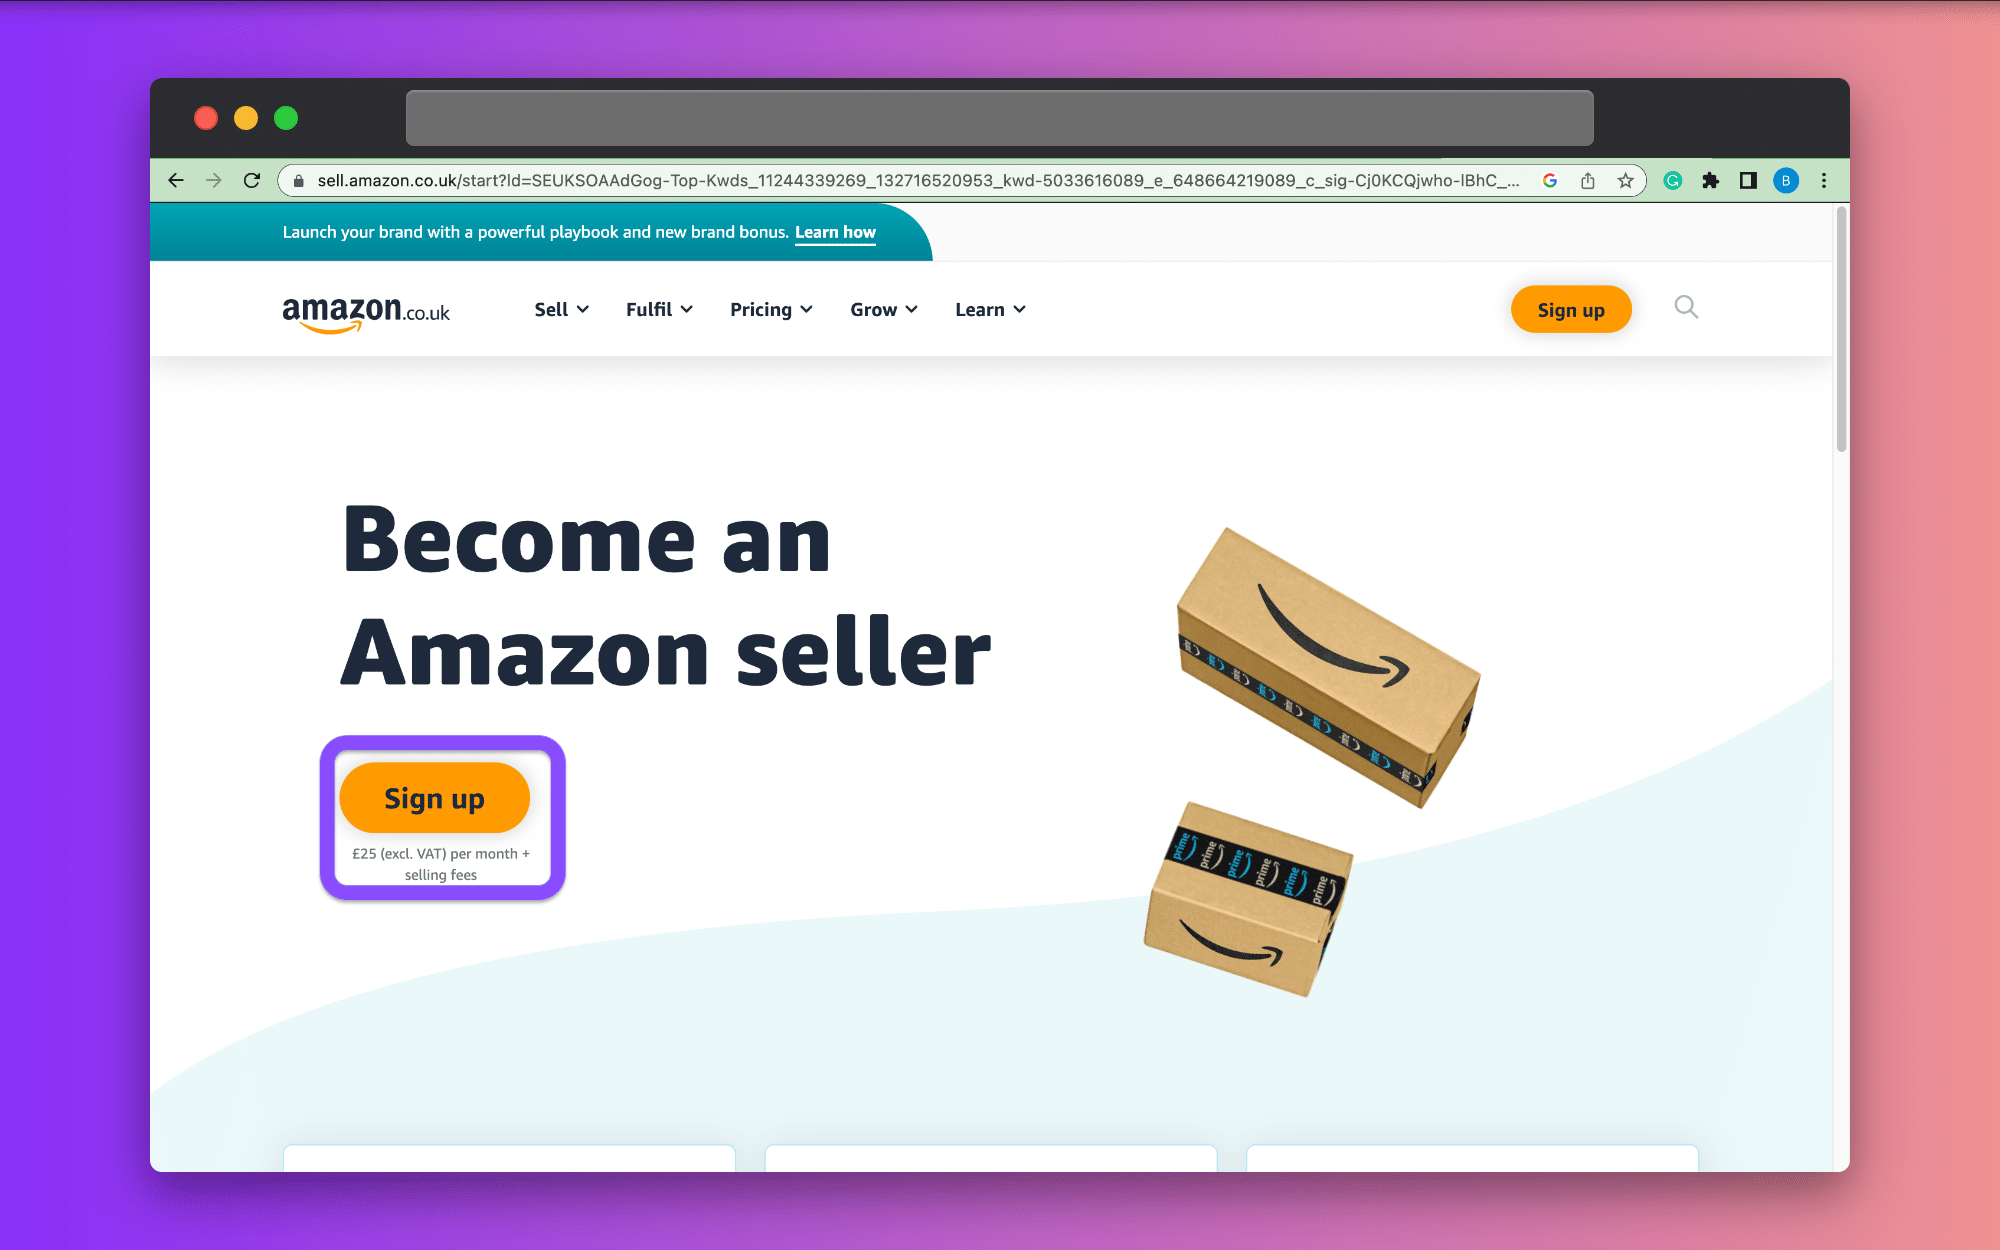 Sign up Amazon Seller Account